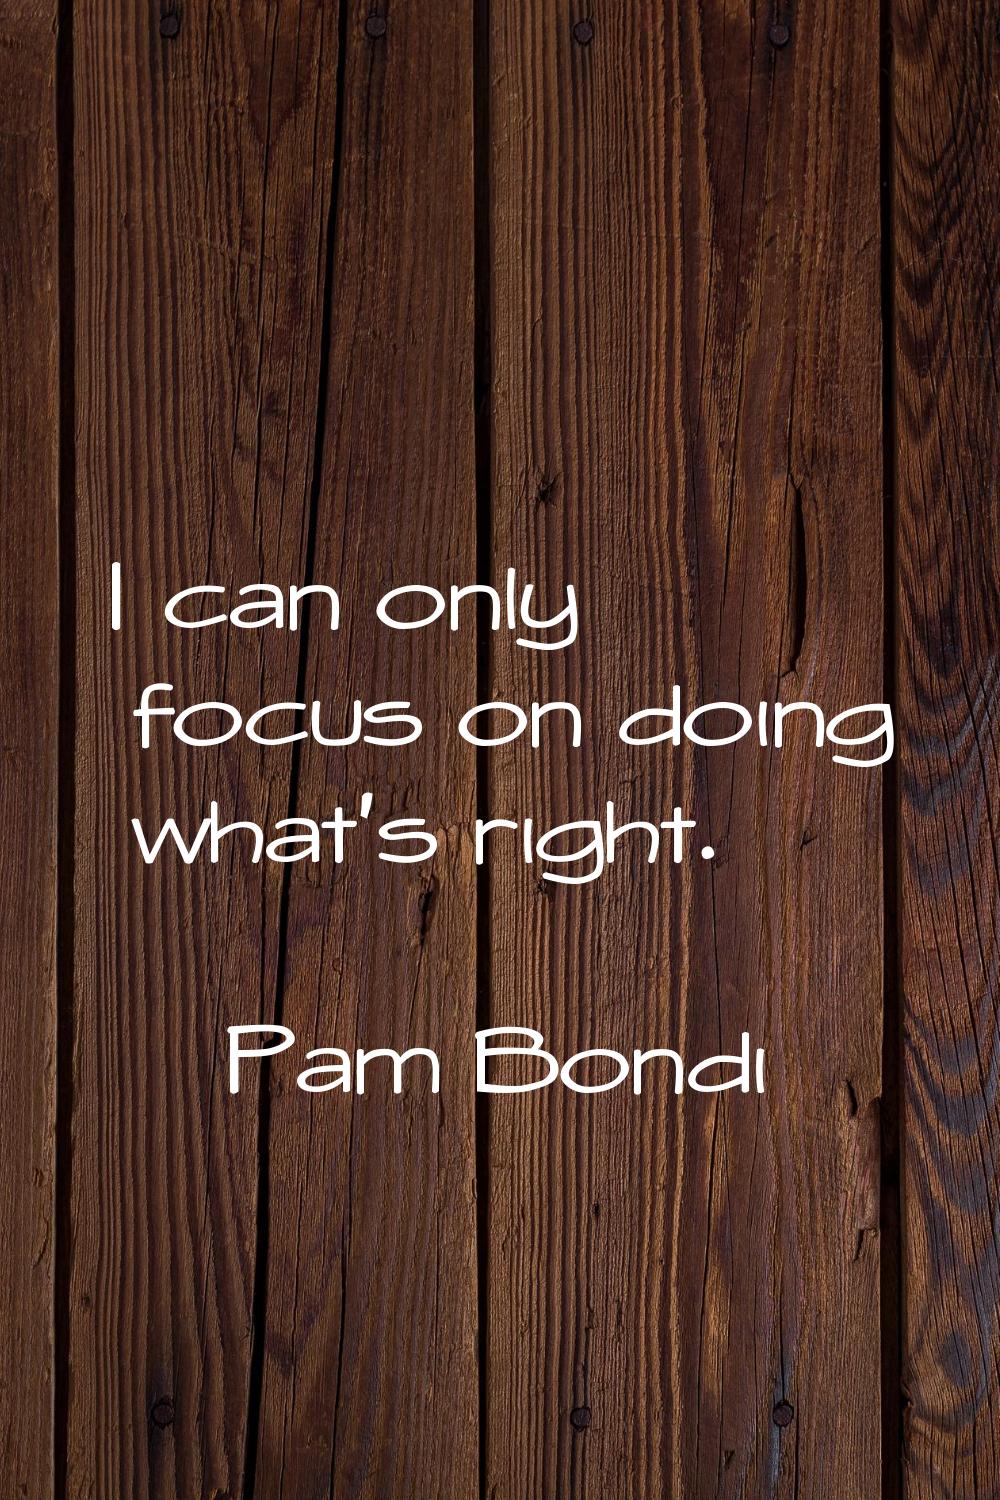 I can only focus on doing what's right.